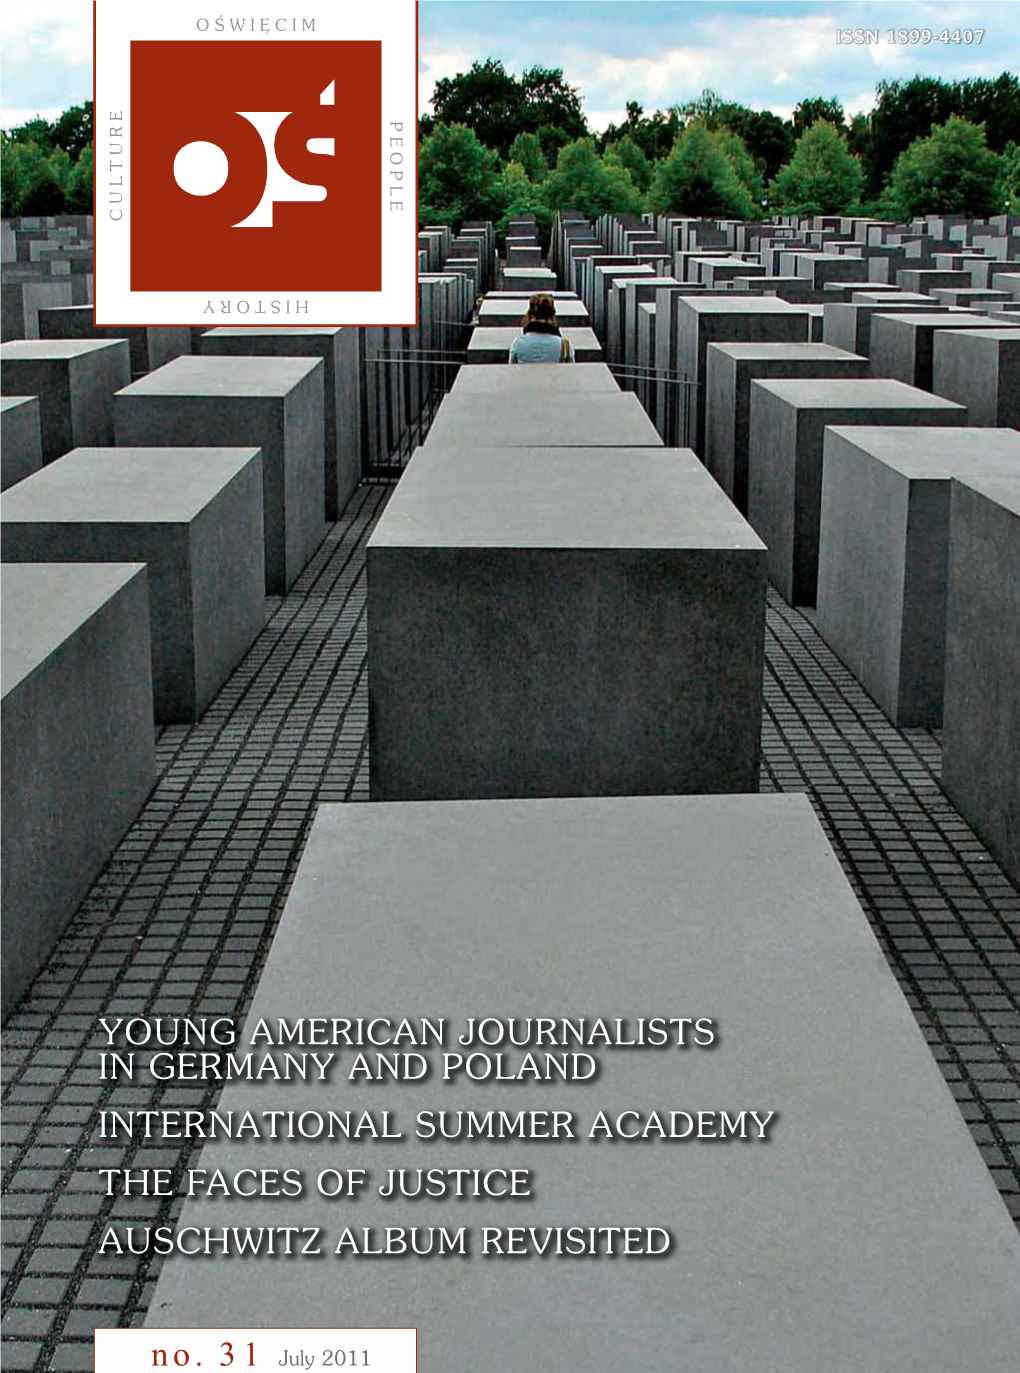 Young American Journalists in Germany and Poland International Summer Academy the Faces of Justice Auschwitz Album Revisited